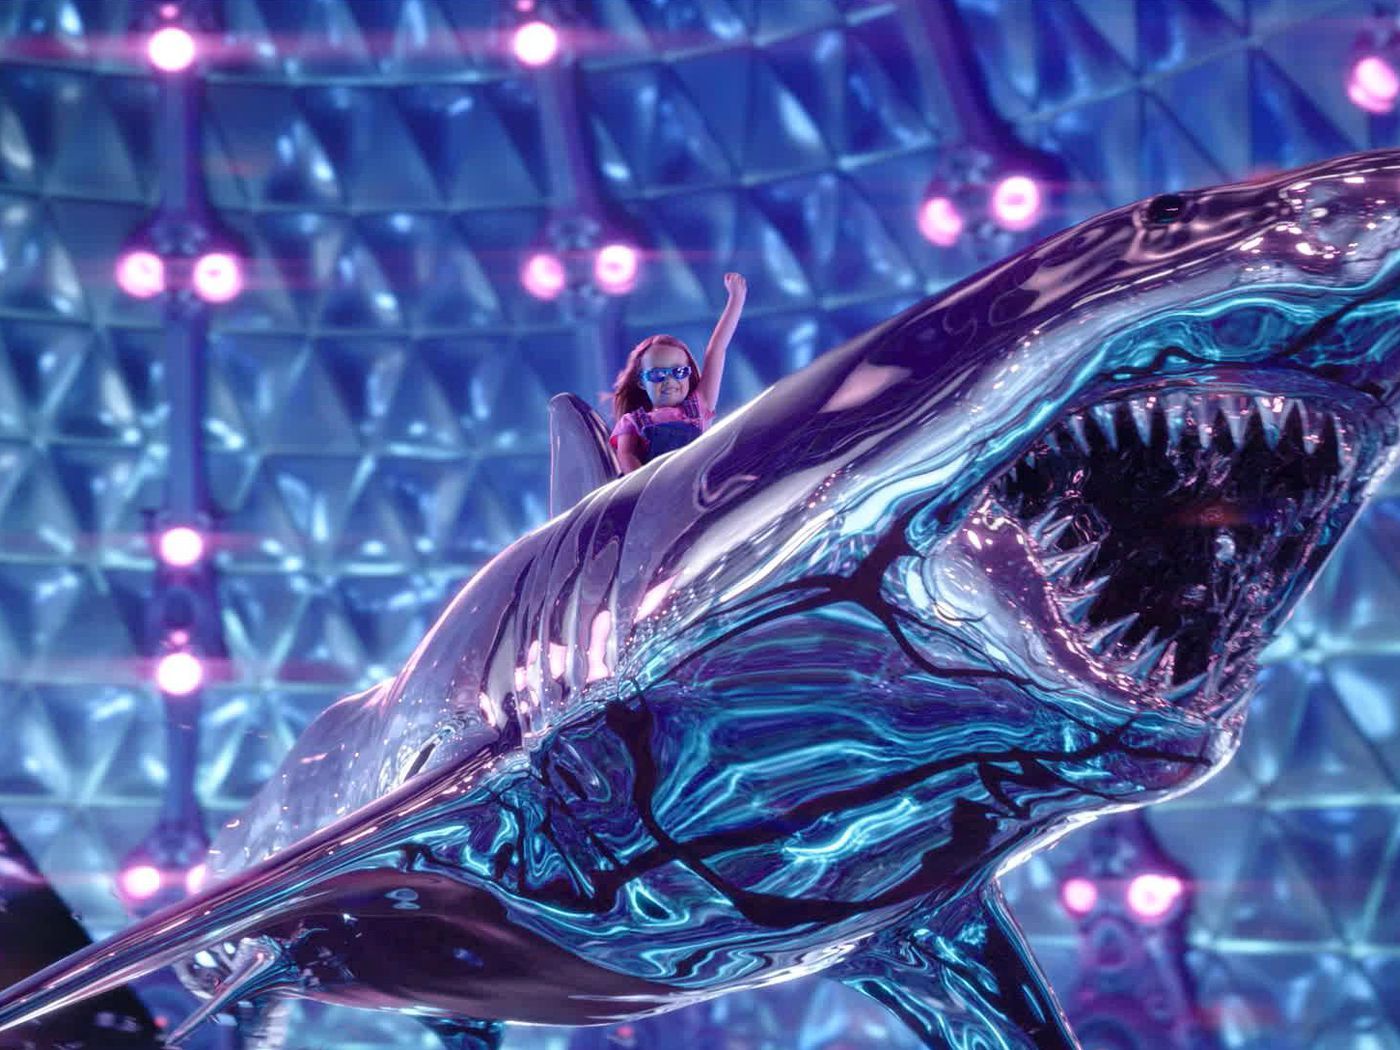 We Can Be Heroes trailer: Sharkboy & Lavagirl's daughter is already an icon